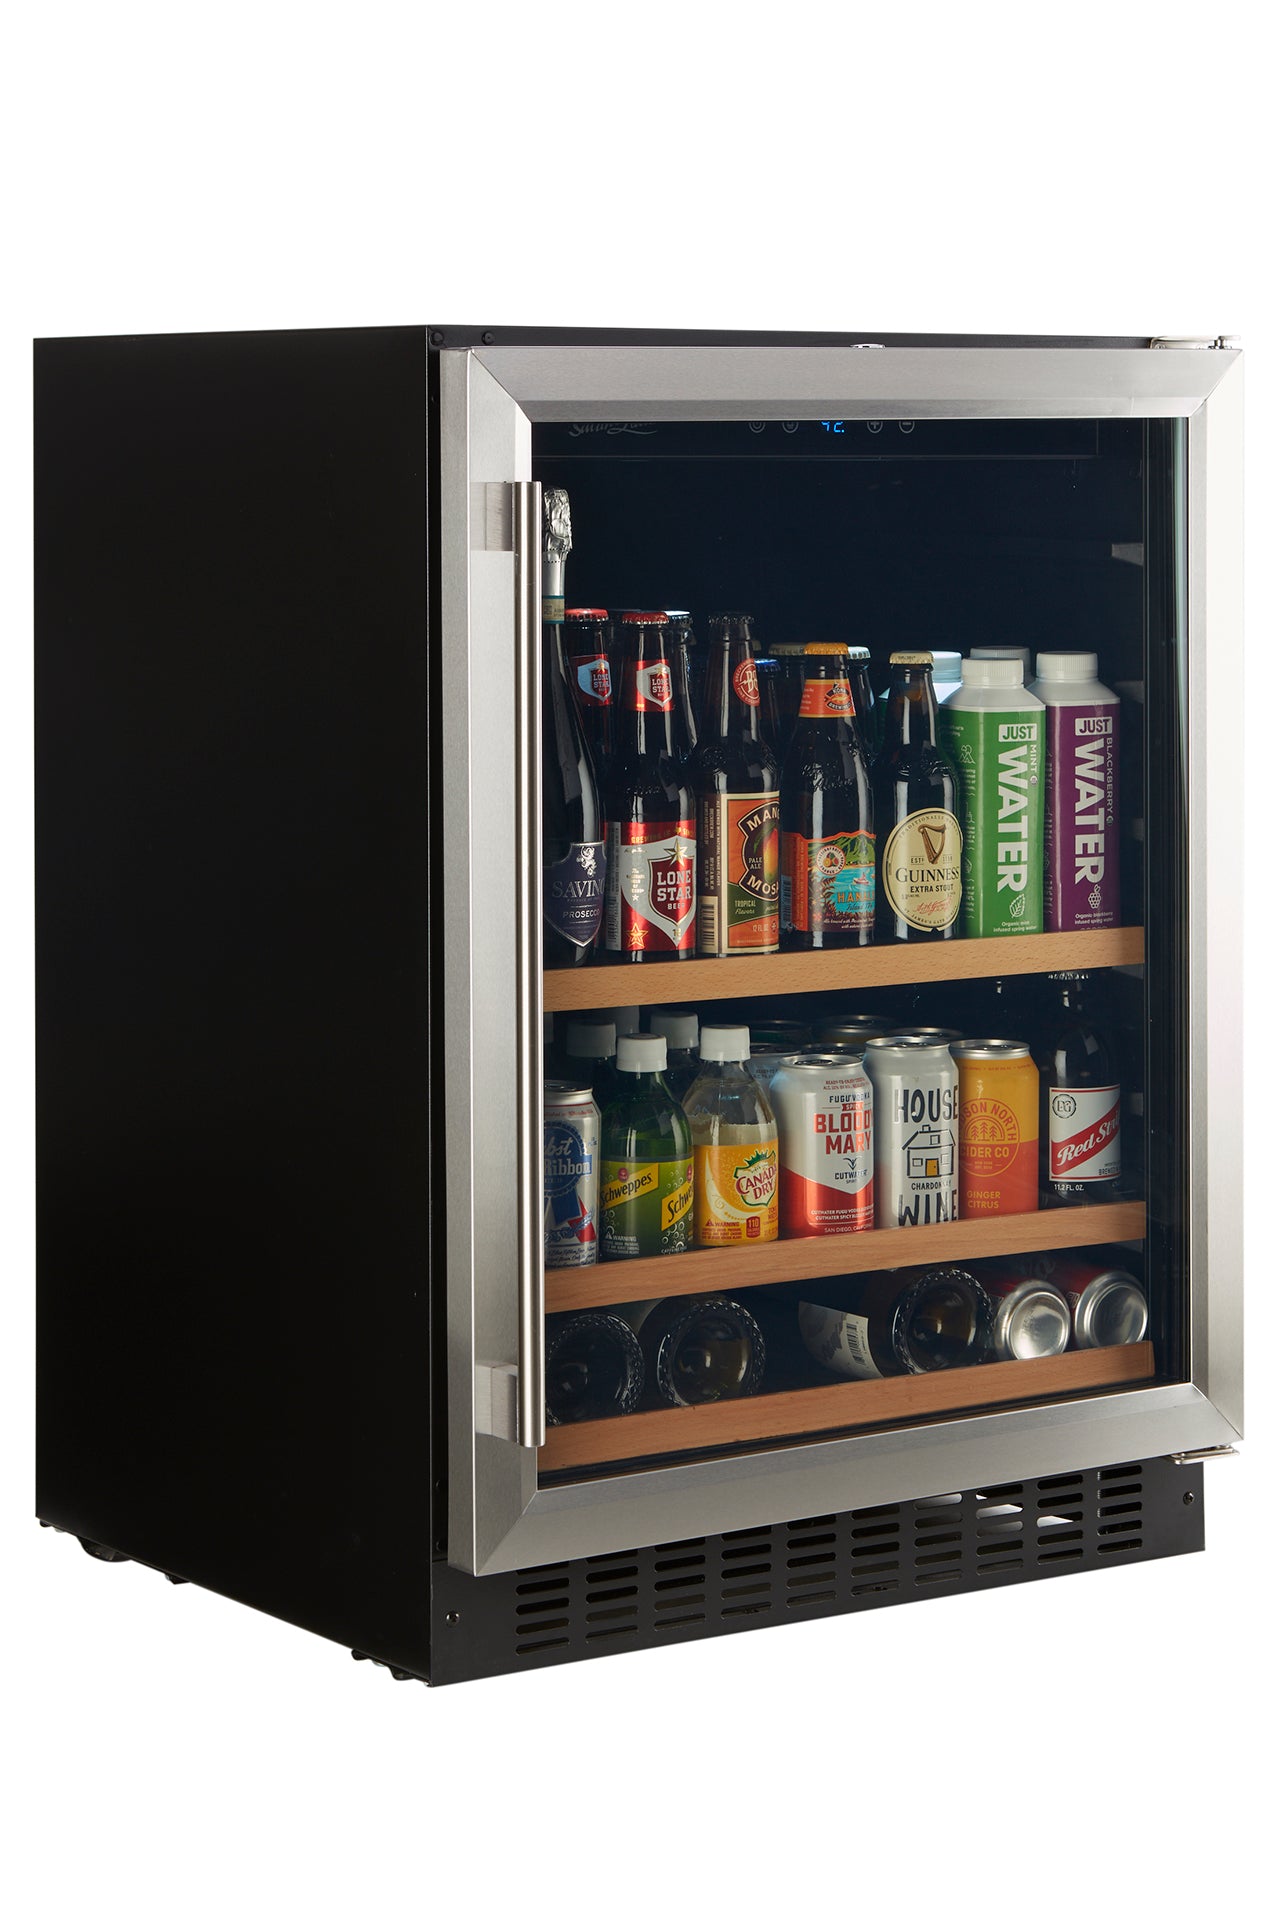 Smith & Hanks - 24" 178-Can Single-Zone Built-in/Freestanding Beverage Center (RE100012)